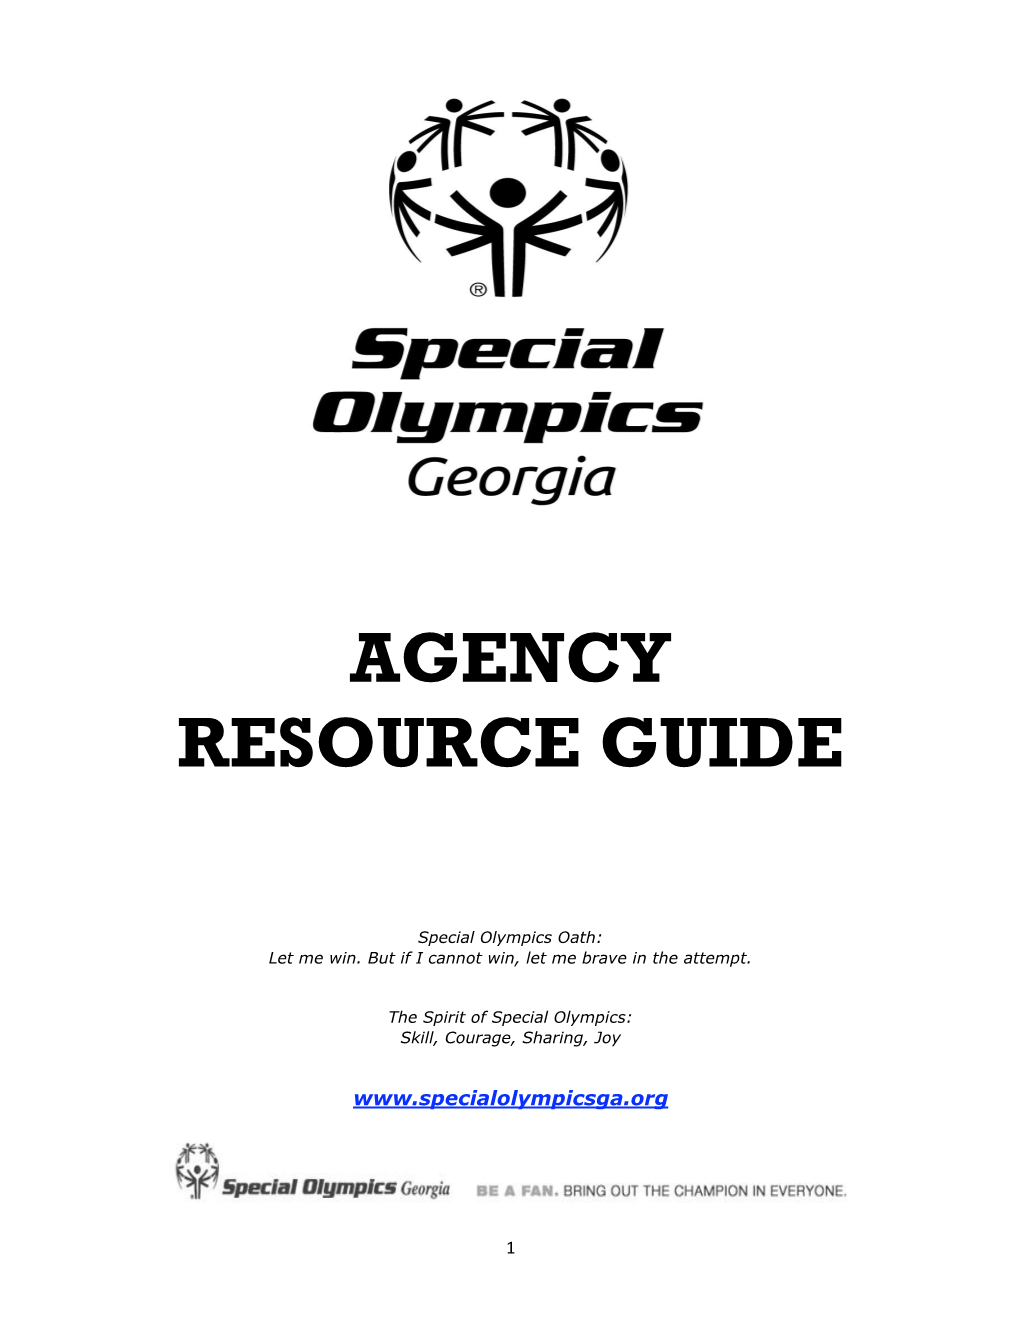 Agency Resource Guide